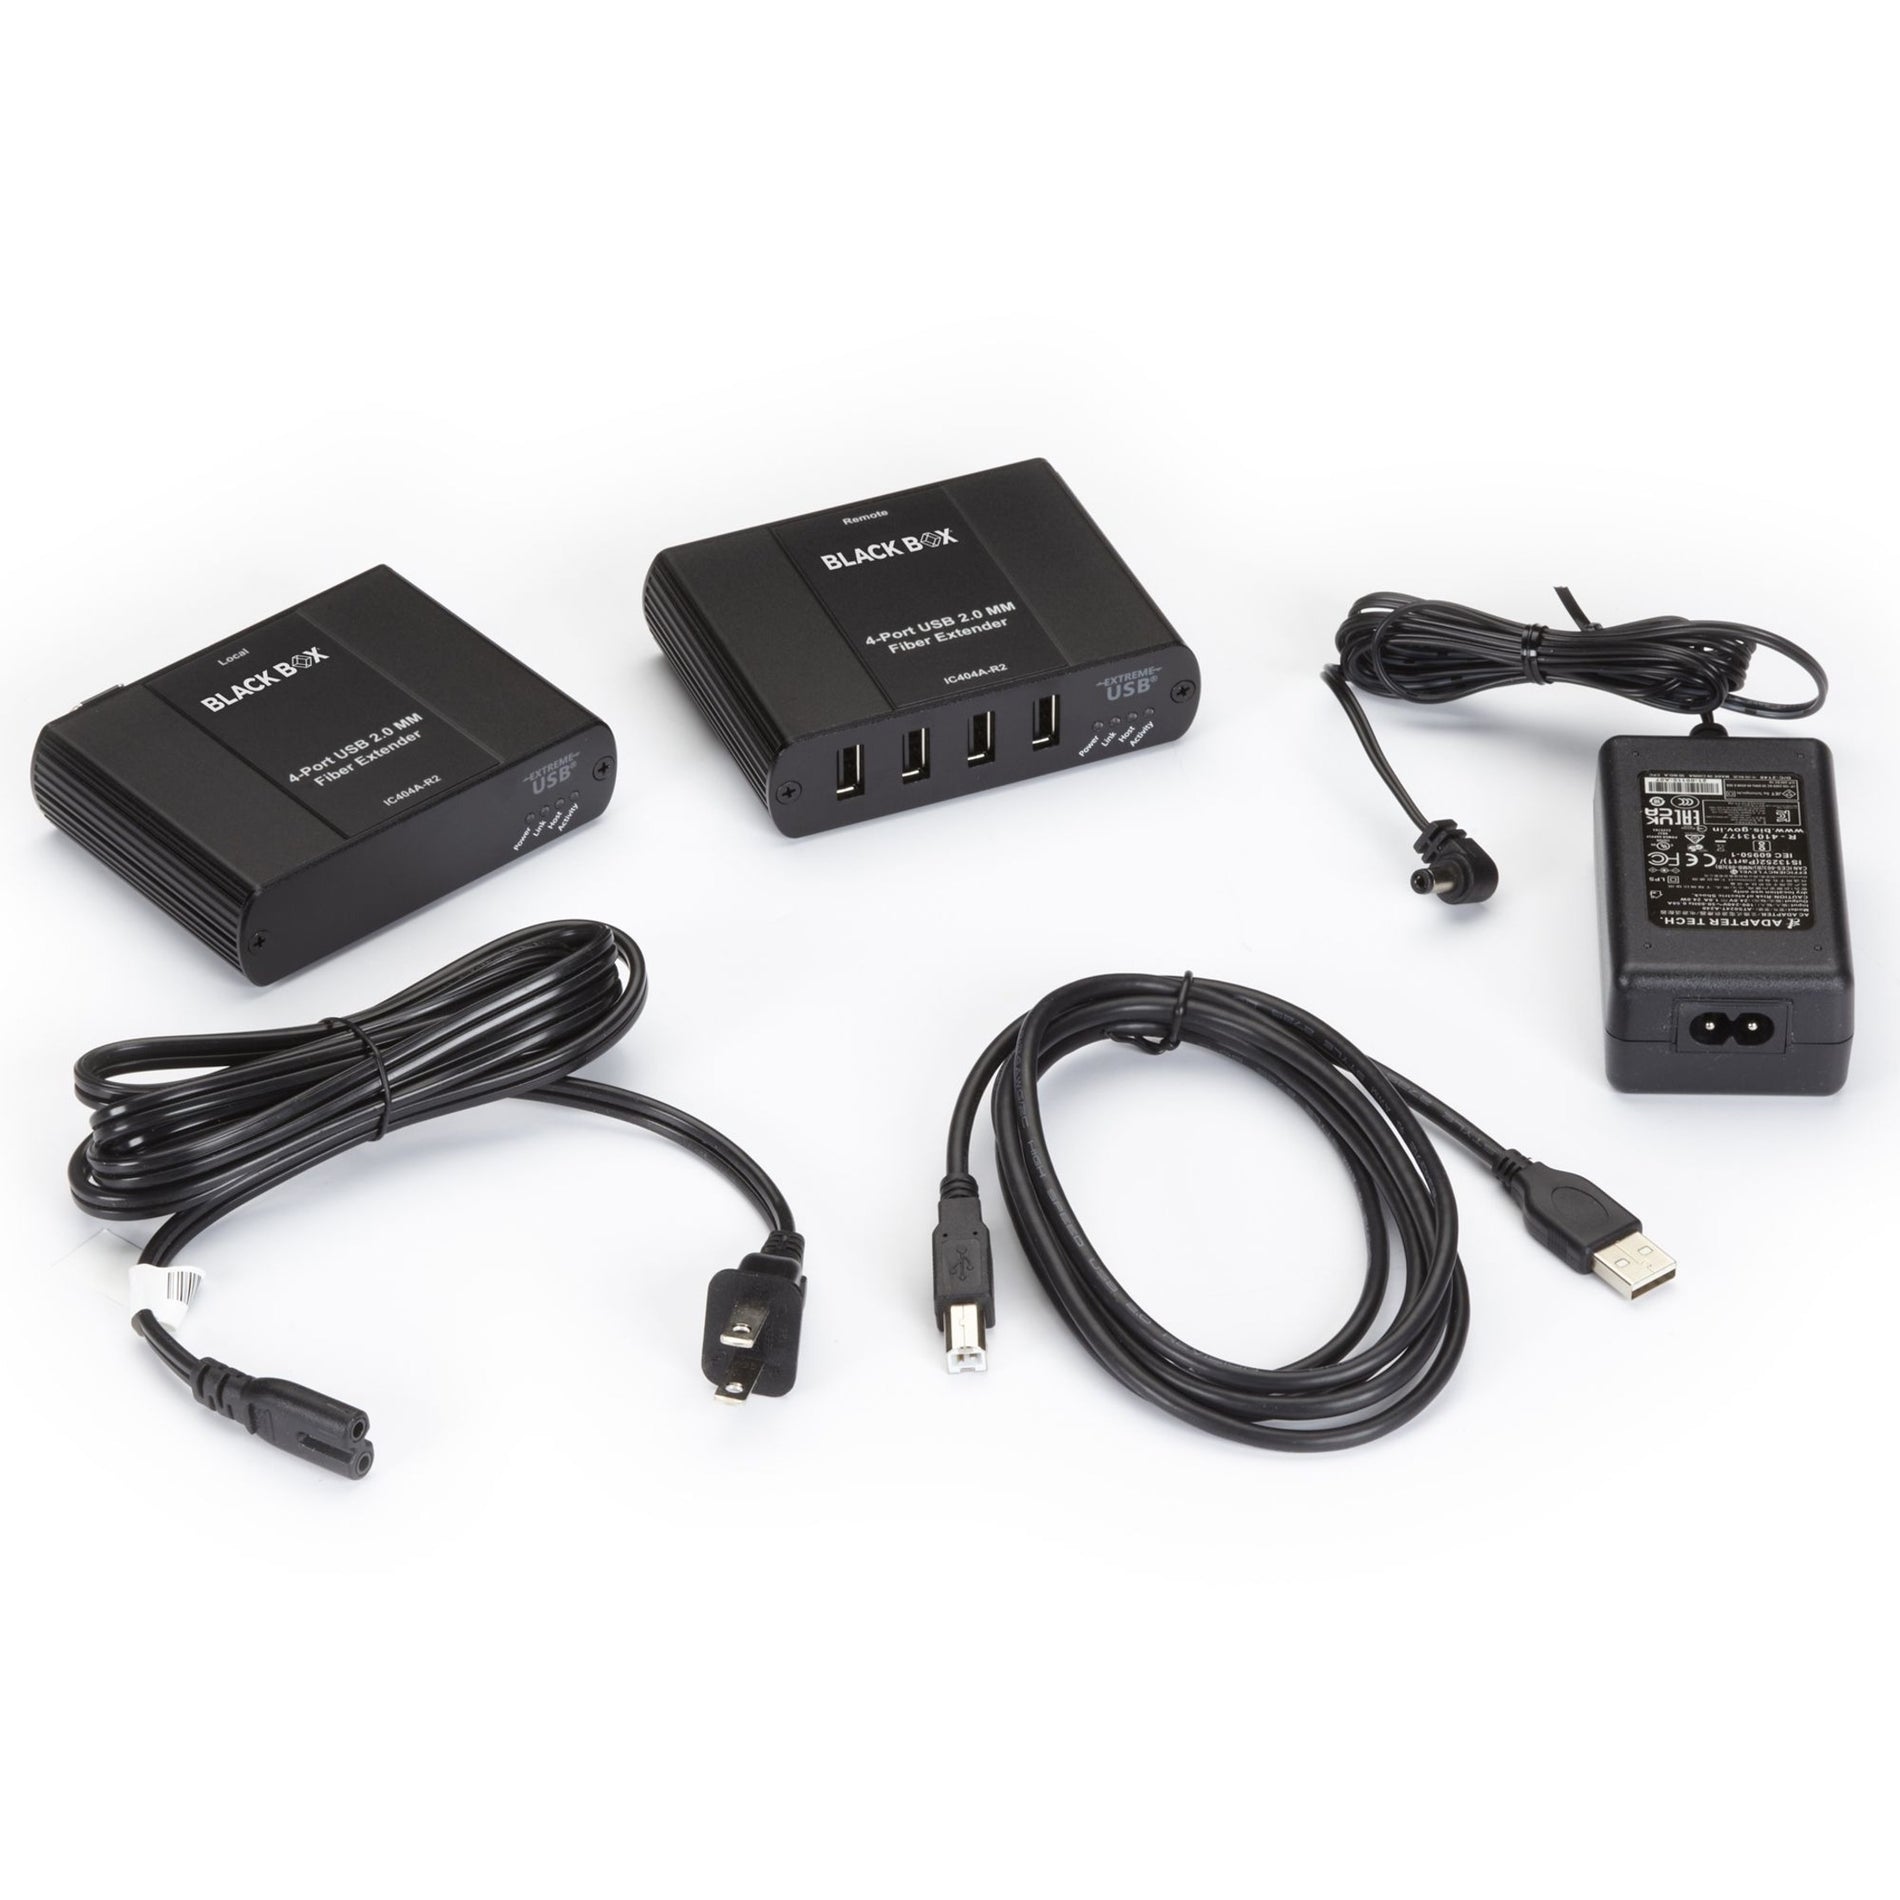 Black Box IC404A-R2 USB 2.0 Extender - Multimode Fiber, 4-Port, Extend USB Connections up to 1640.42 ft